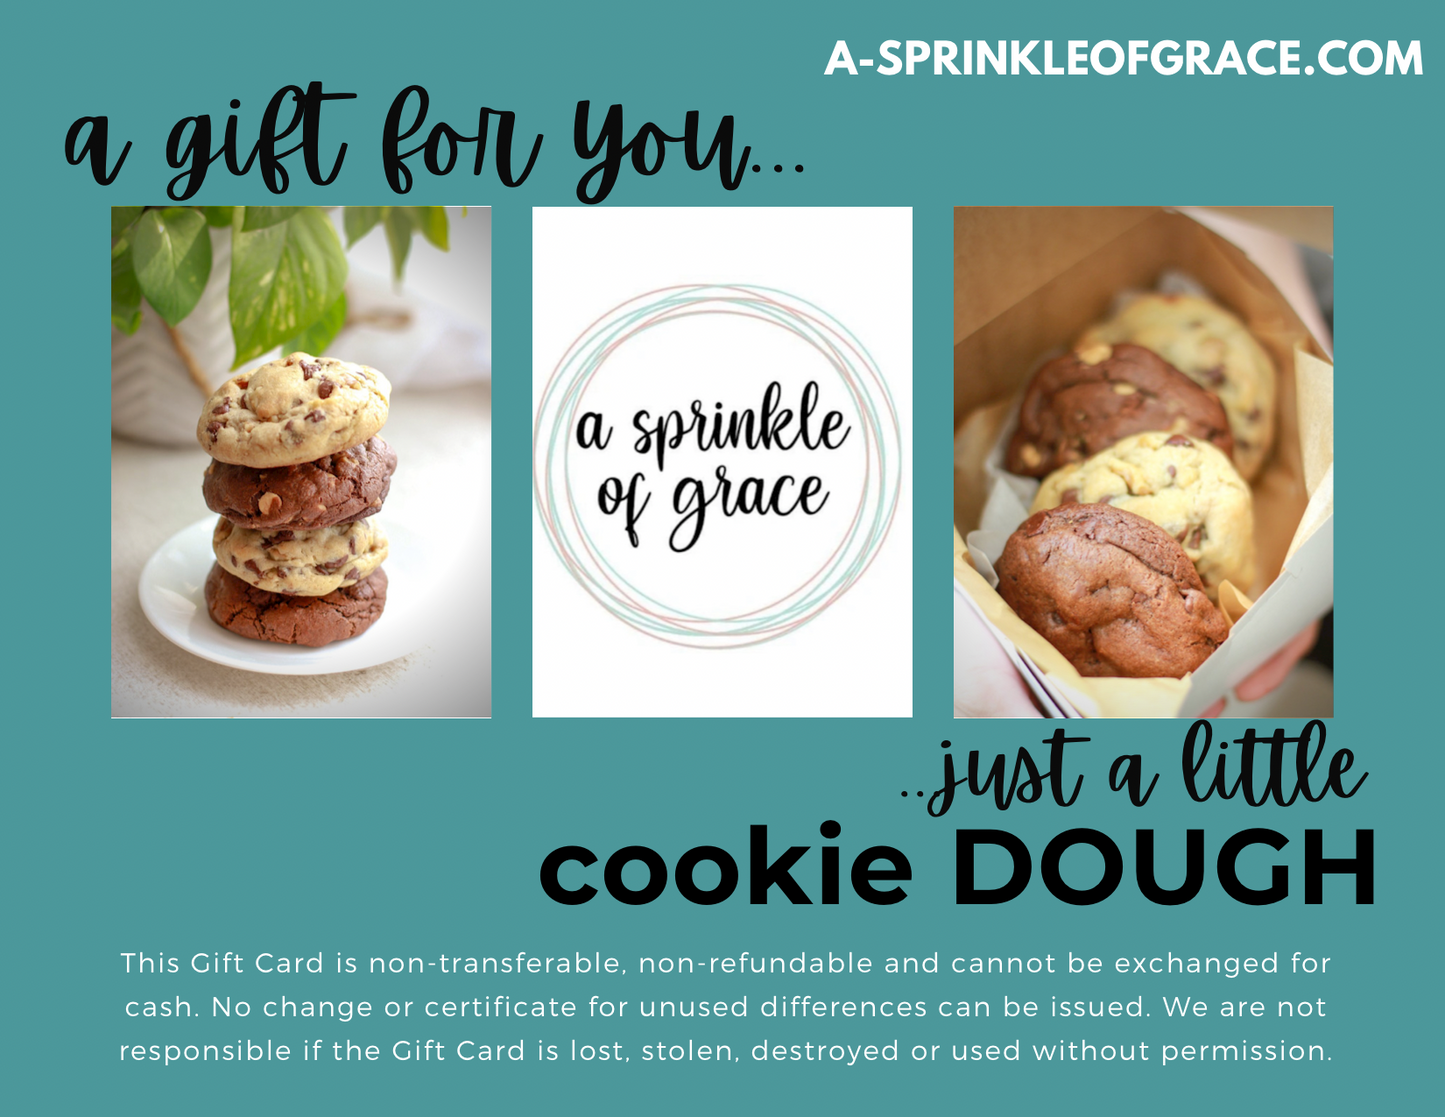 COOKIE DOUGH Gift Card